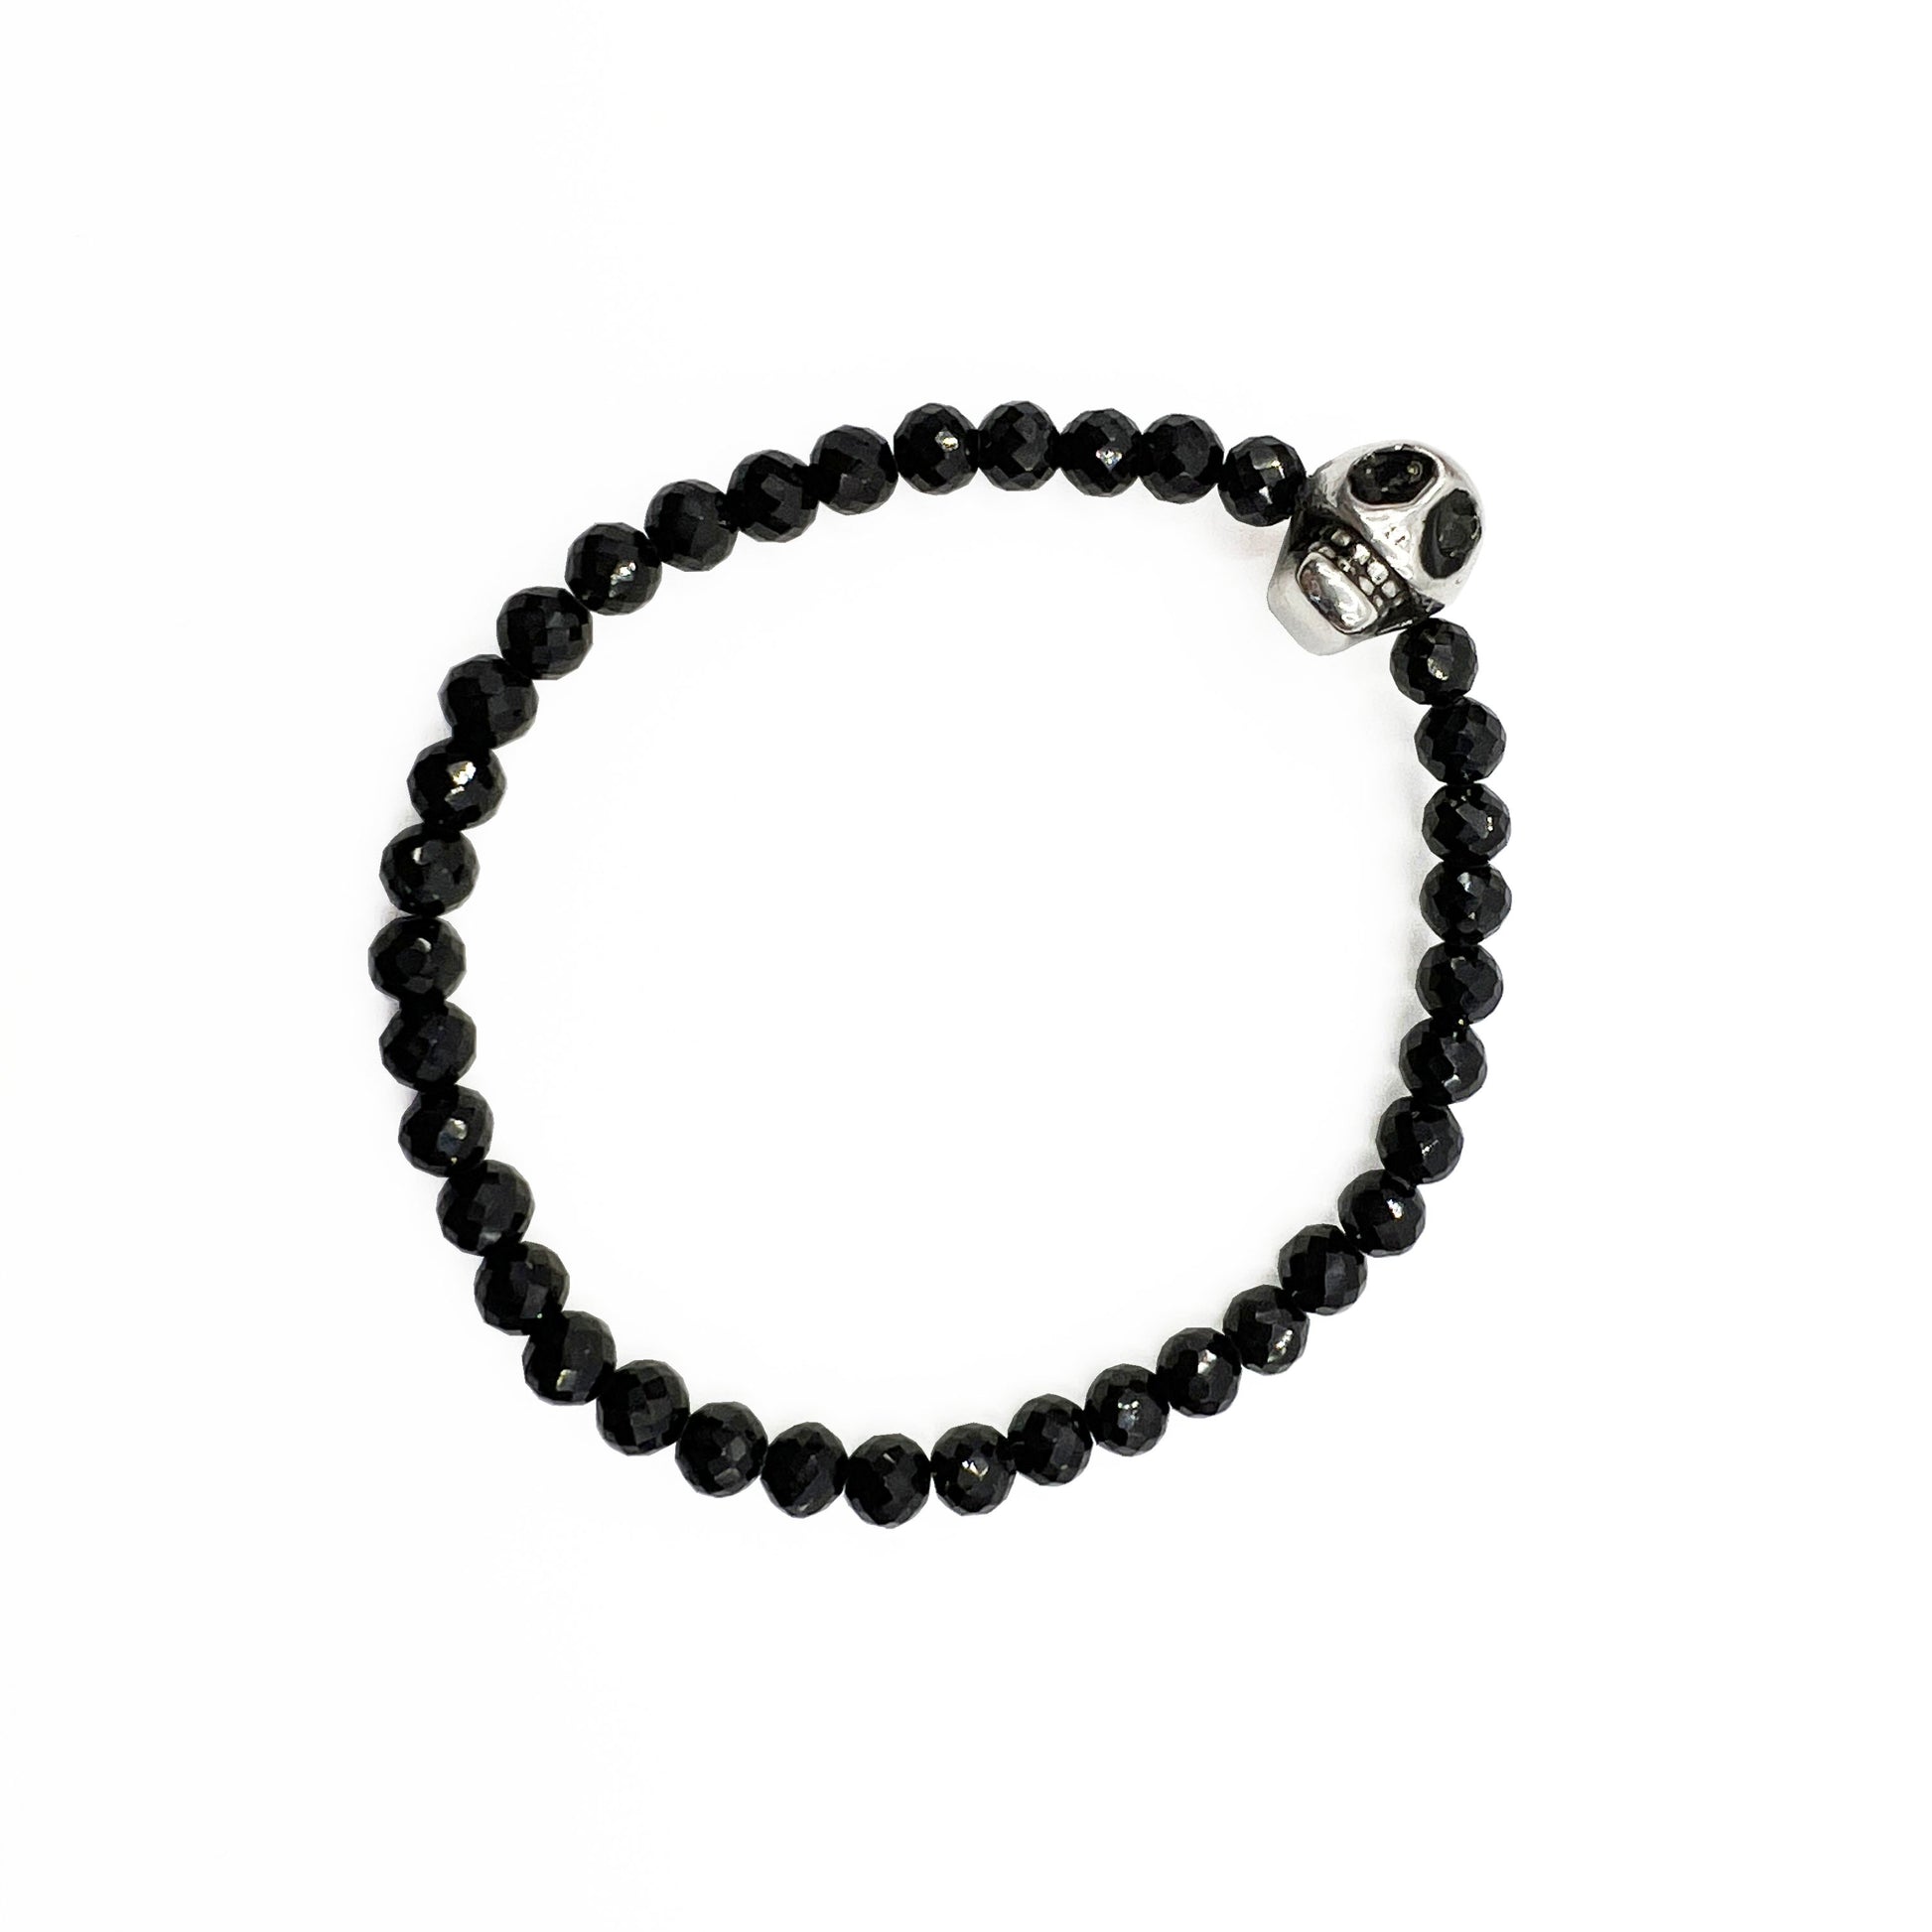 Black, Gray and Silver Stainless Steel Bead Bracelets with Science Charms & Tassle